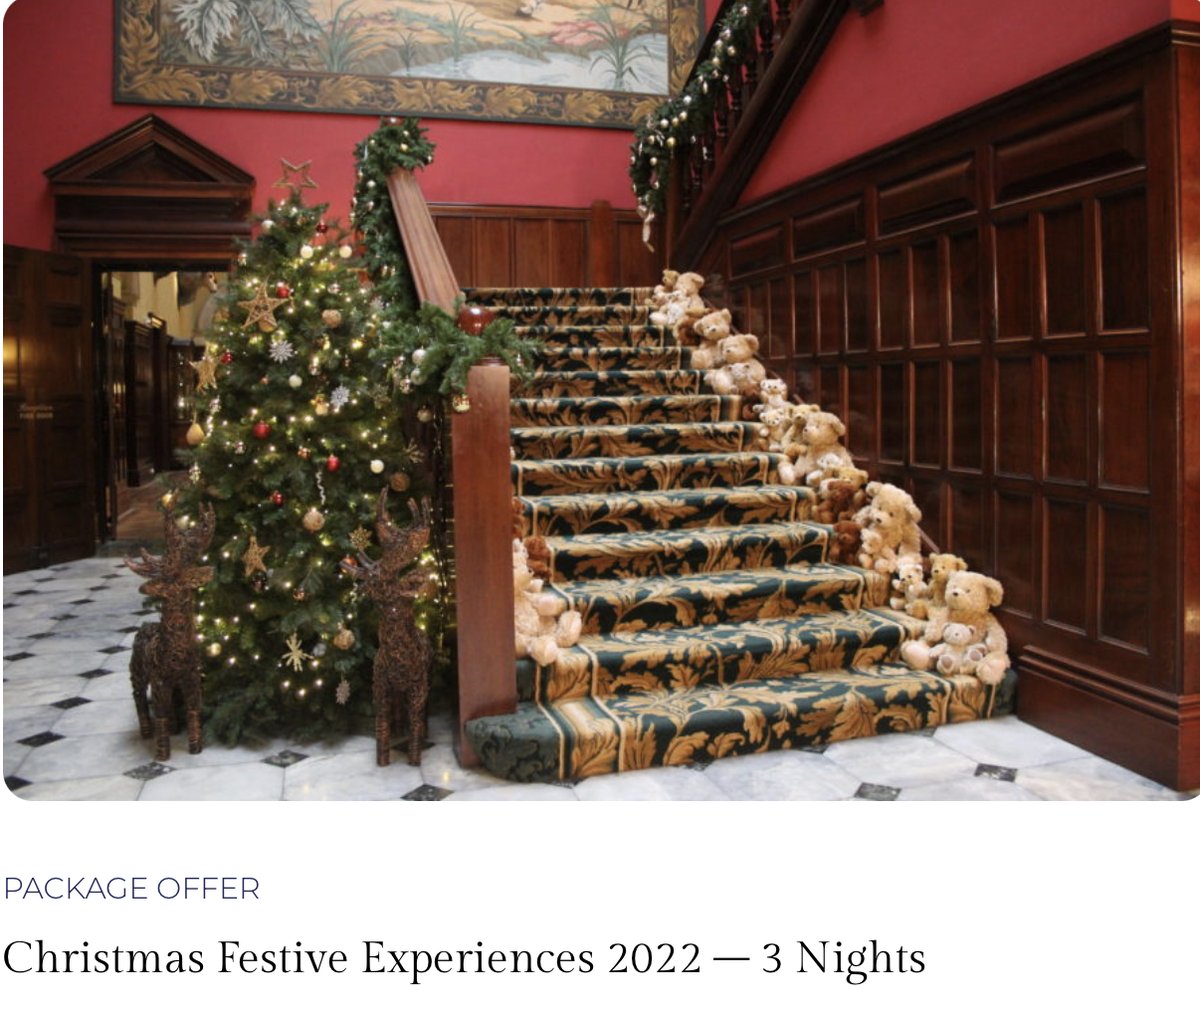 staplefordpark.com/festive-experi… Book your 2 & 3 Day Christmas Package and experience the delights of Stapleford Park in all its festive glory. Limited Availability.